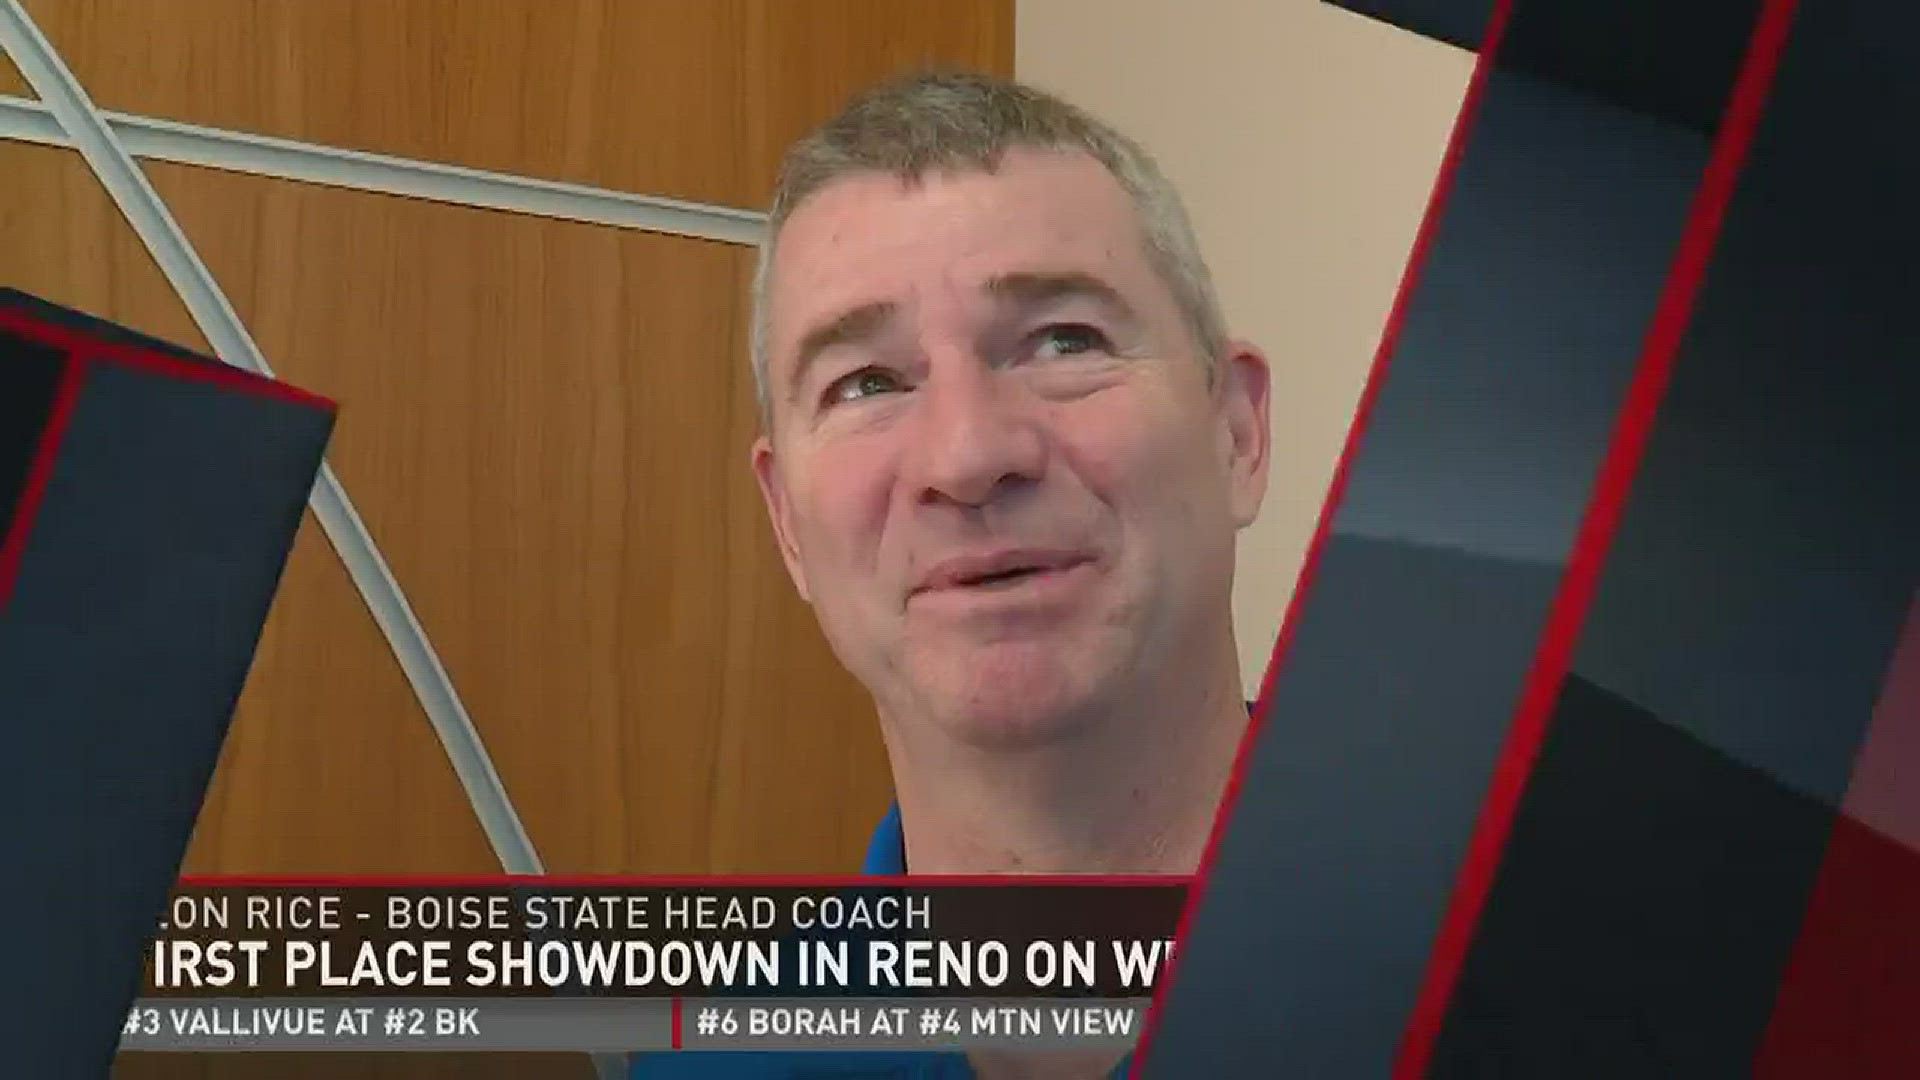 The Boise State men's basketball team will face Nevada in Reno on Wednesday night.